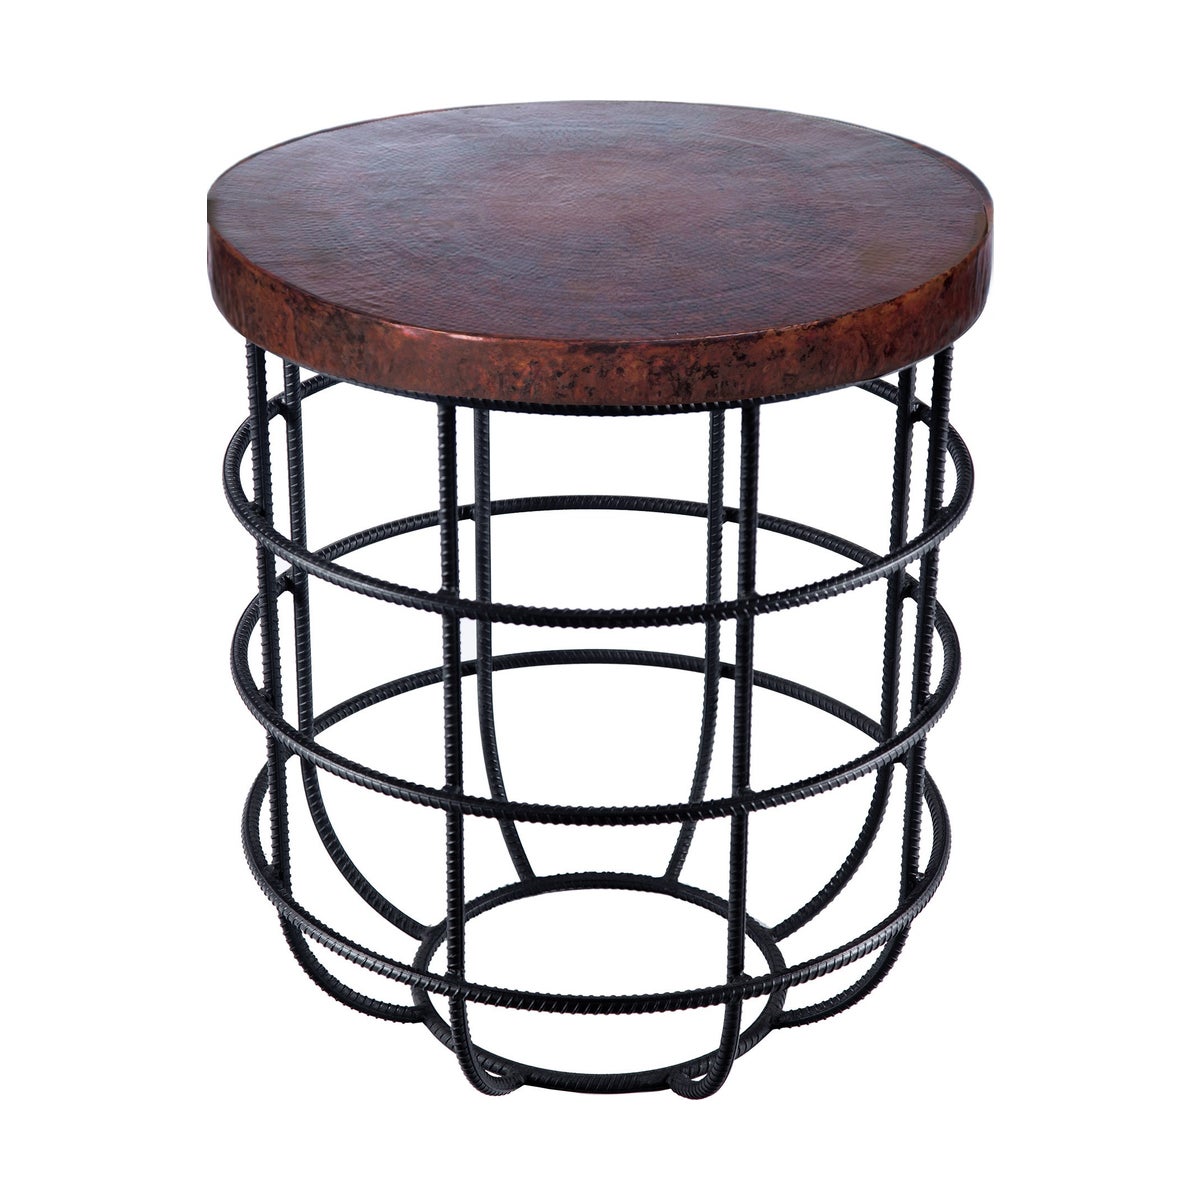 Axel Side Table in Rebar with Round Dark Brown Hammered Copper Top